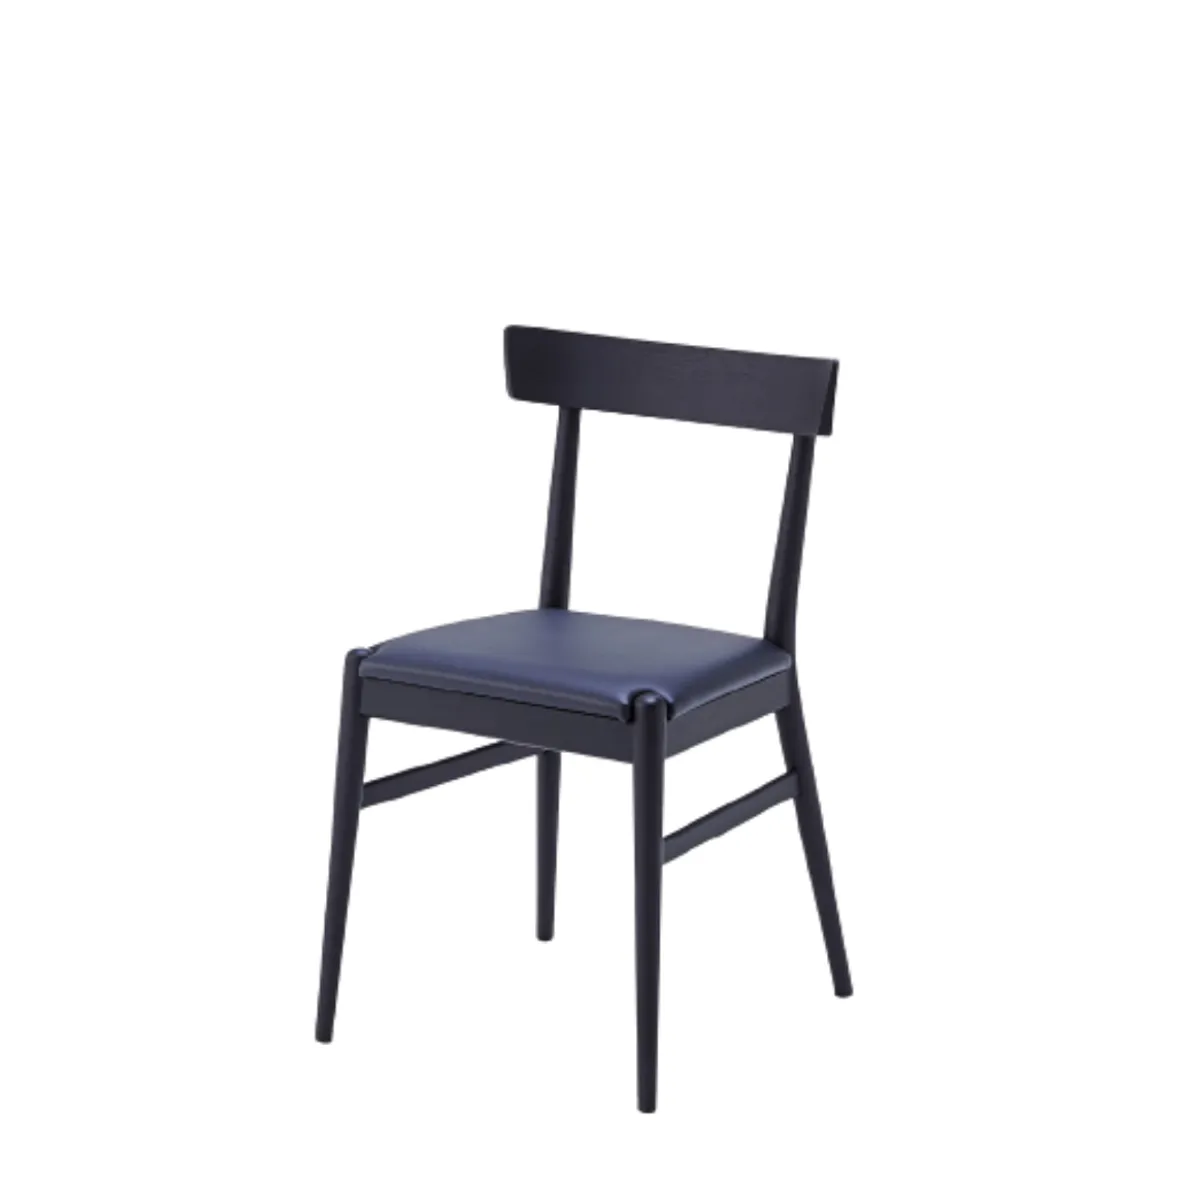 Province side chair (1)